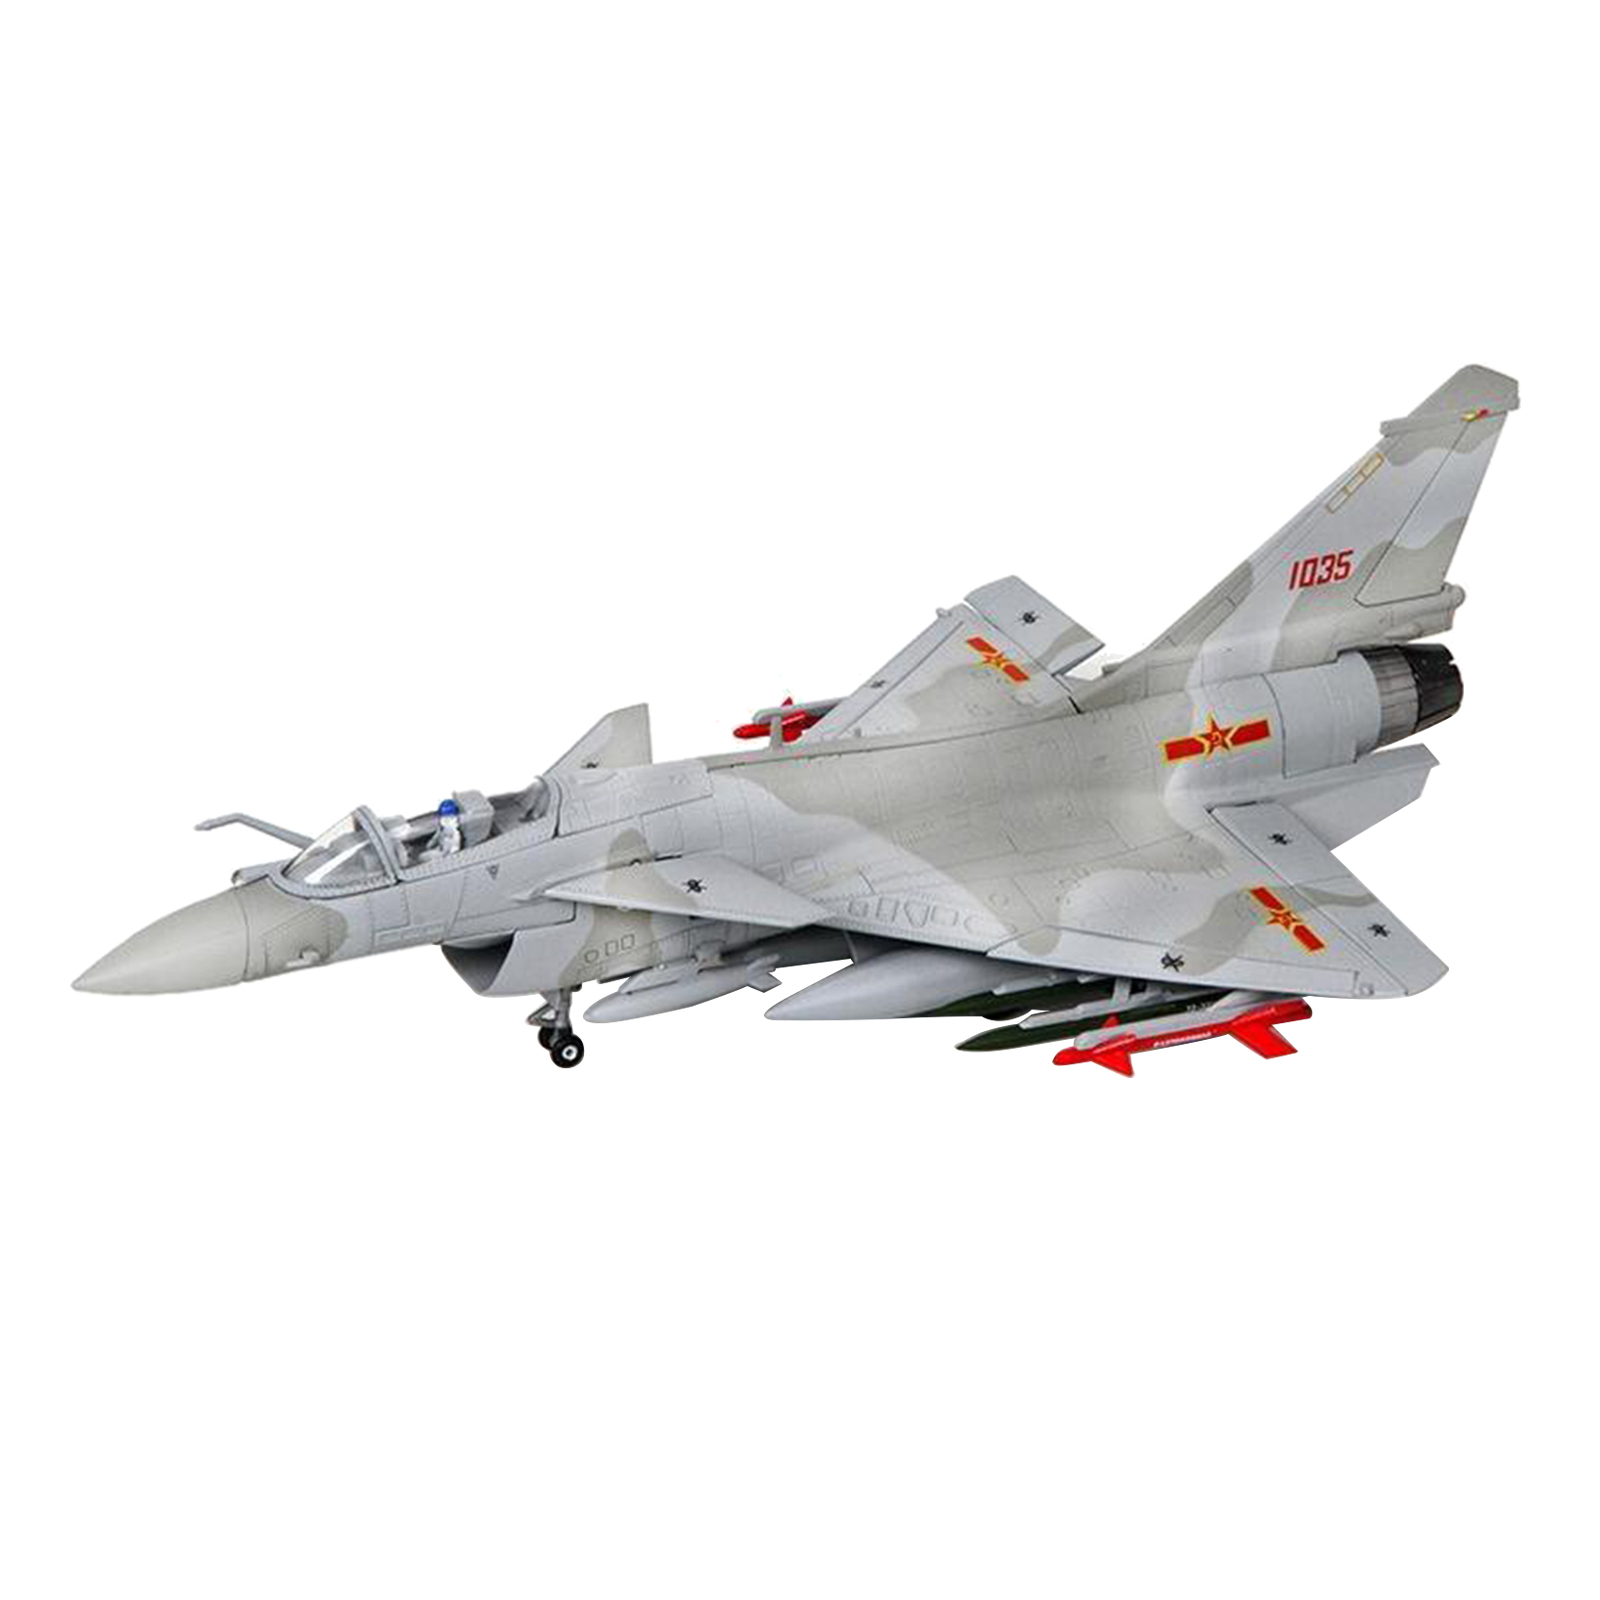 1:48 Scale Aeroplane F-10B Aircraft Plane Aviation Die Cast Model with Stand